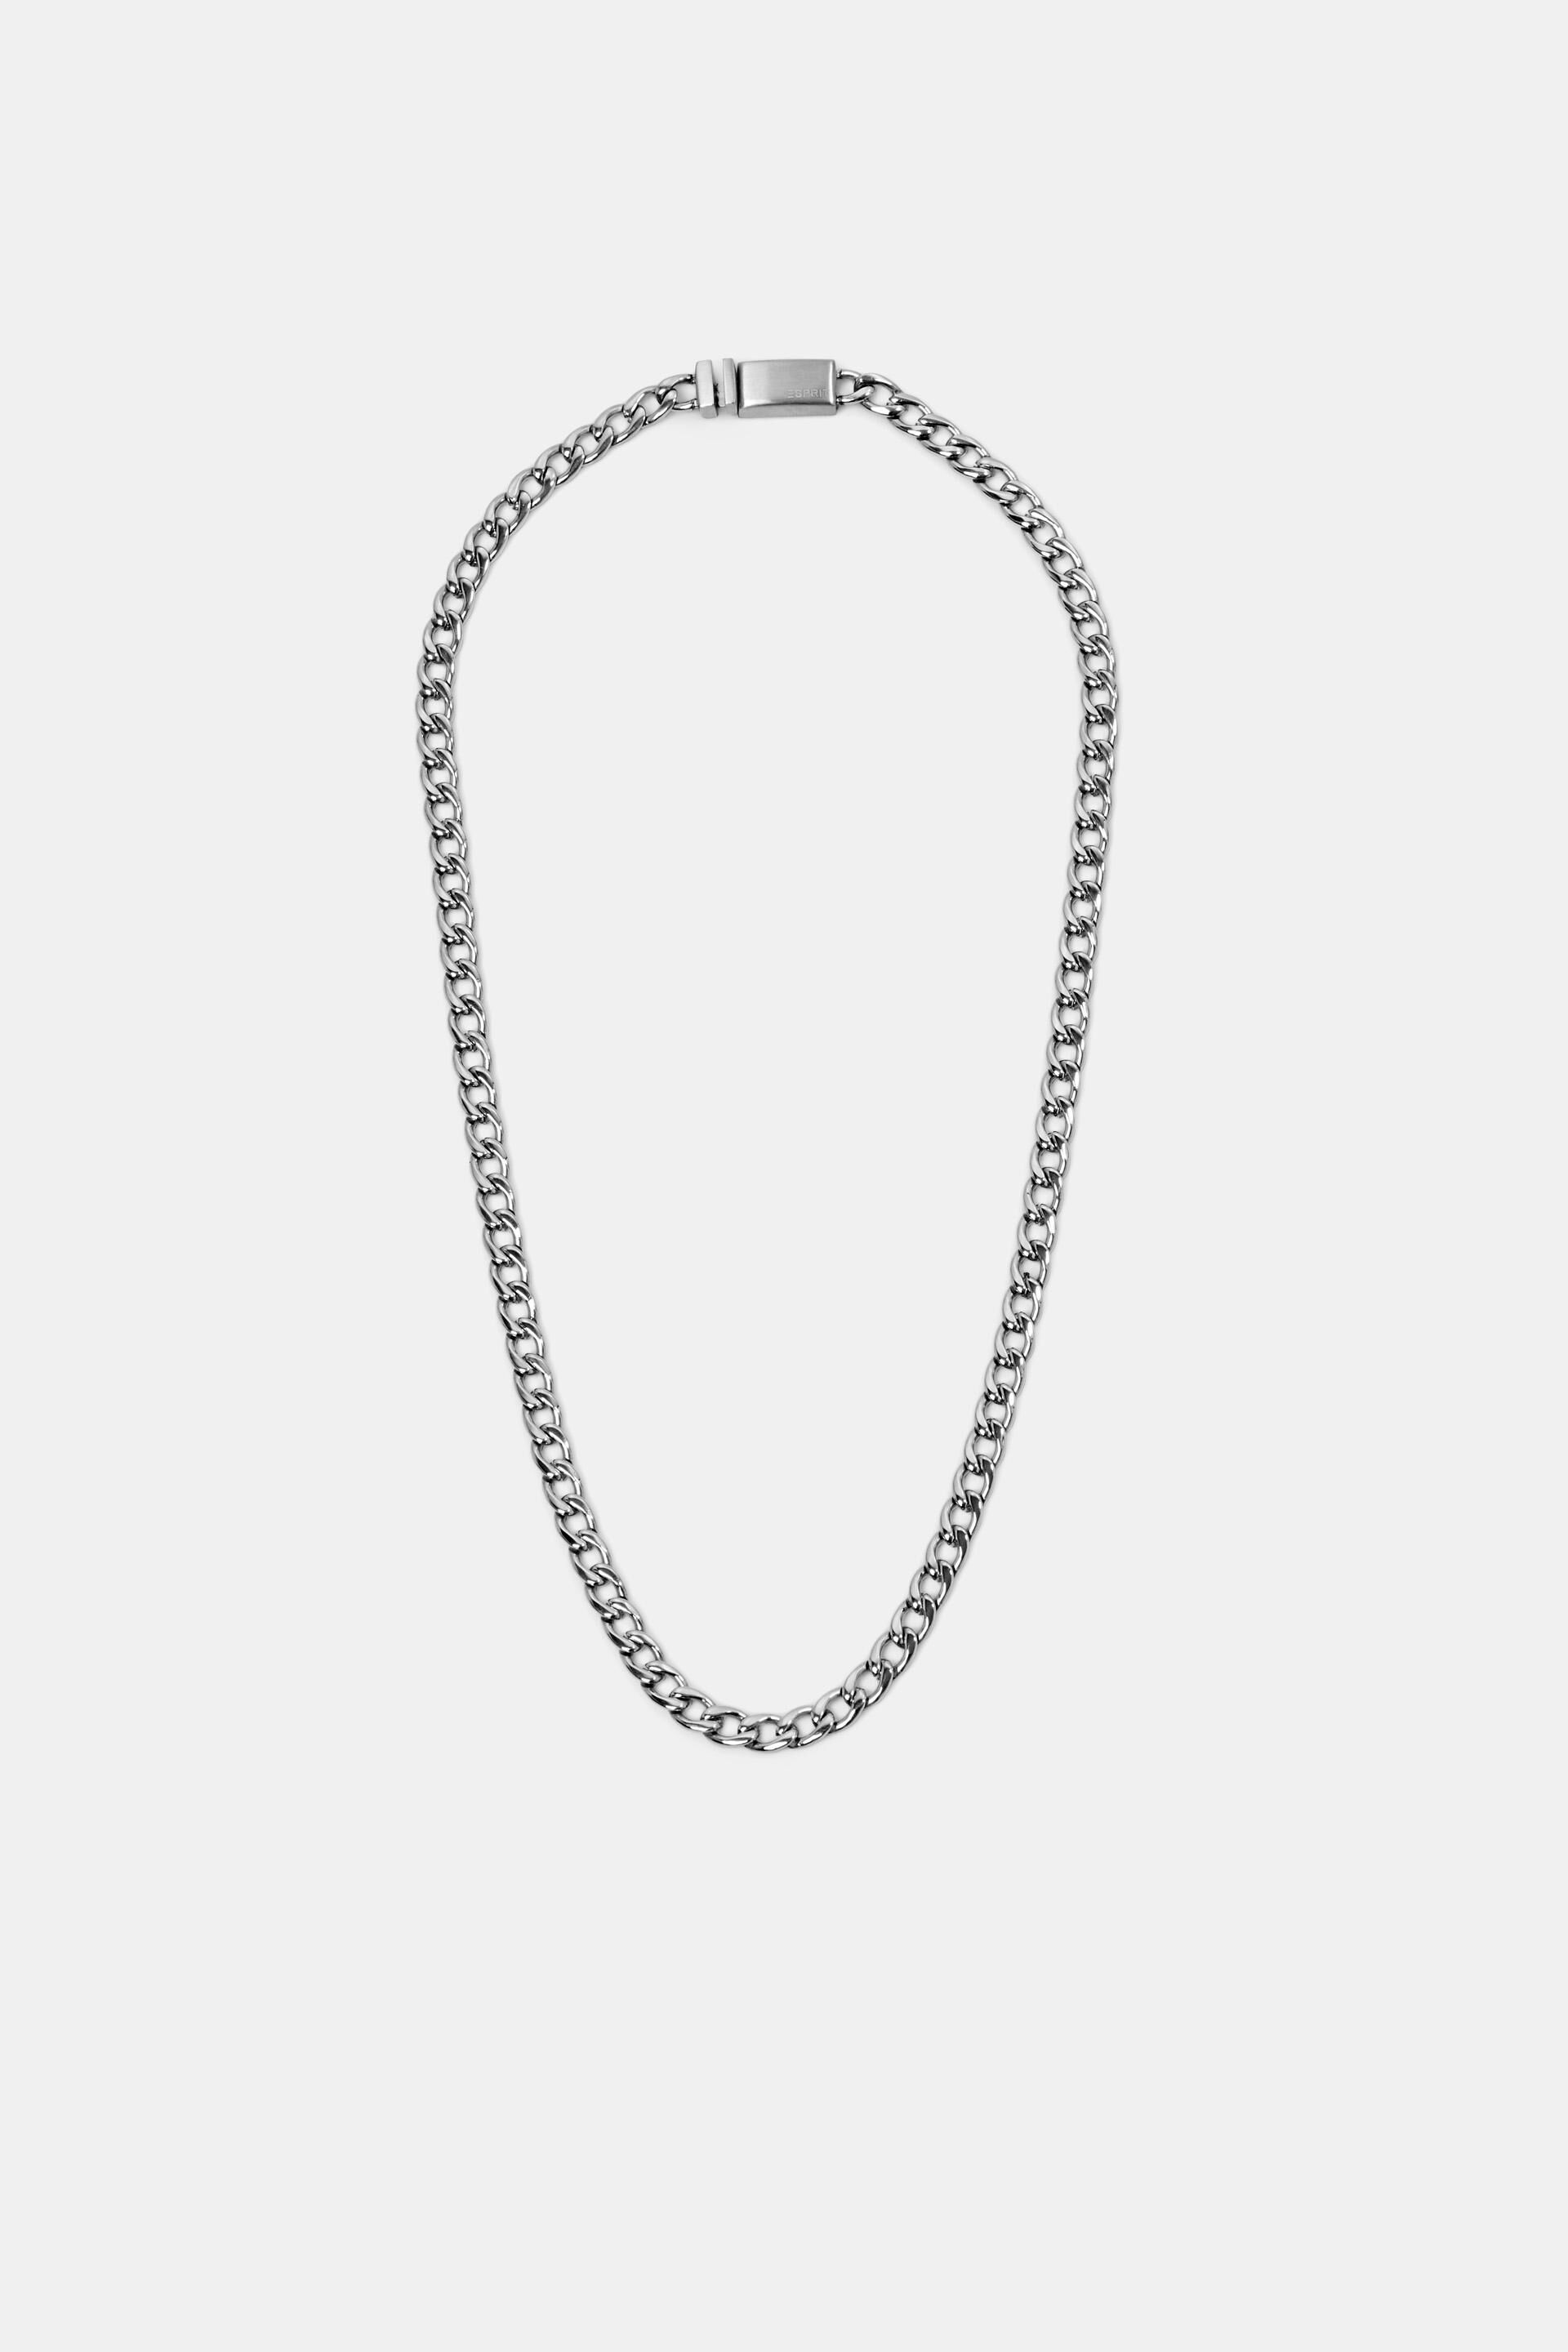 Esprit piece necklace mid Chain chunky with